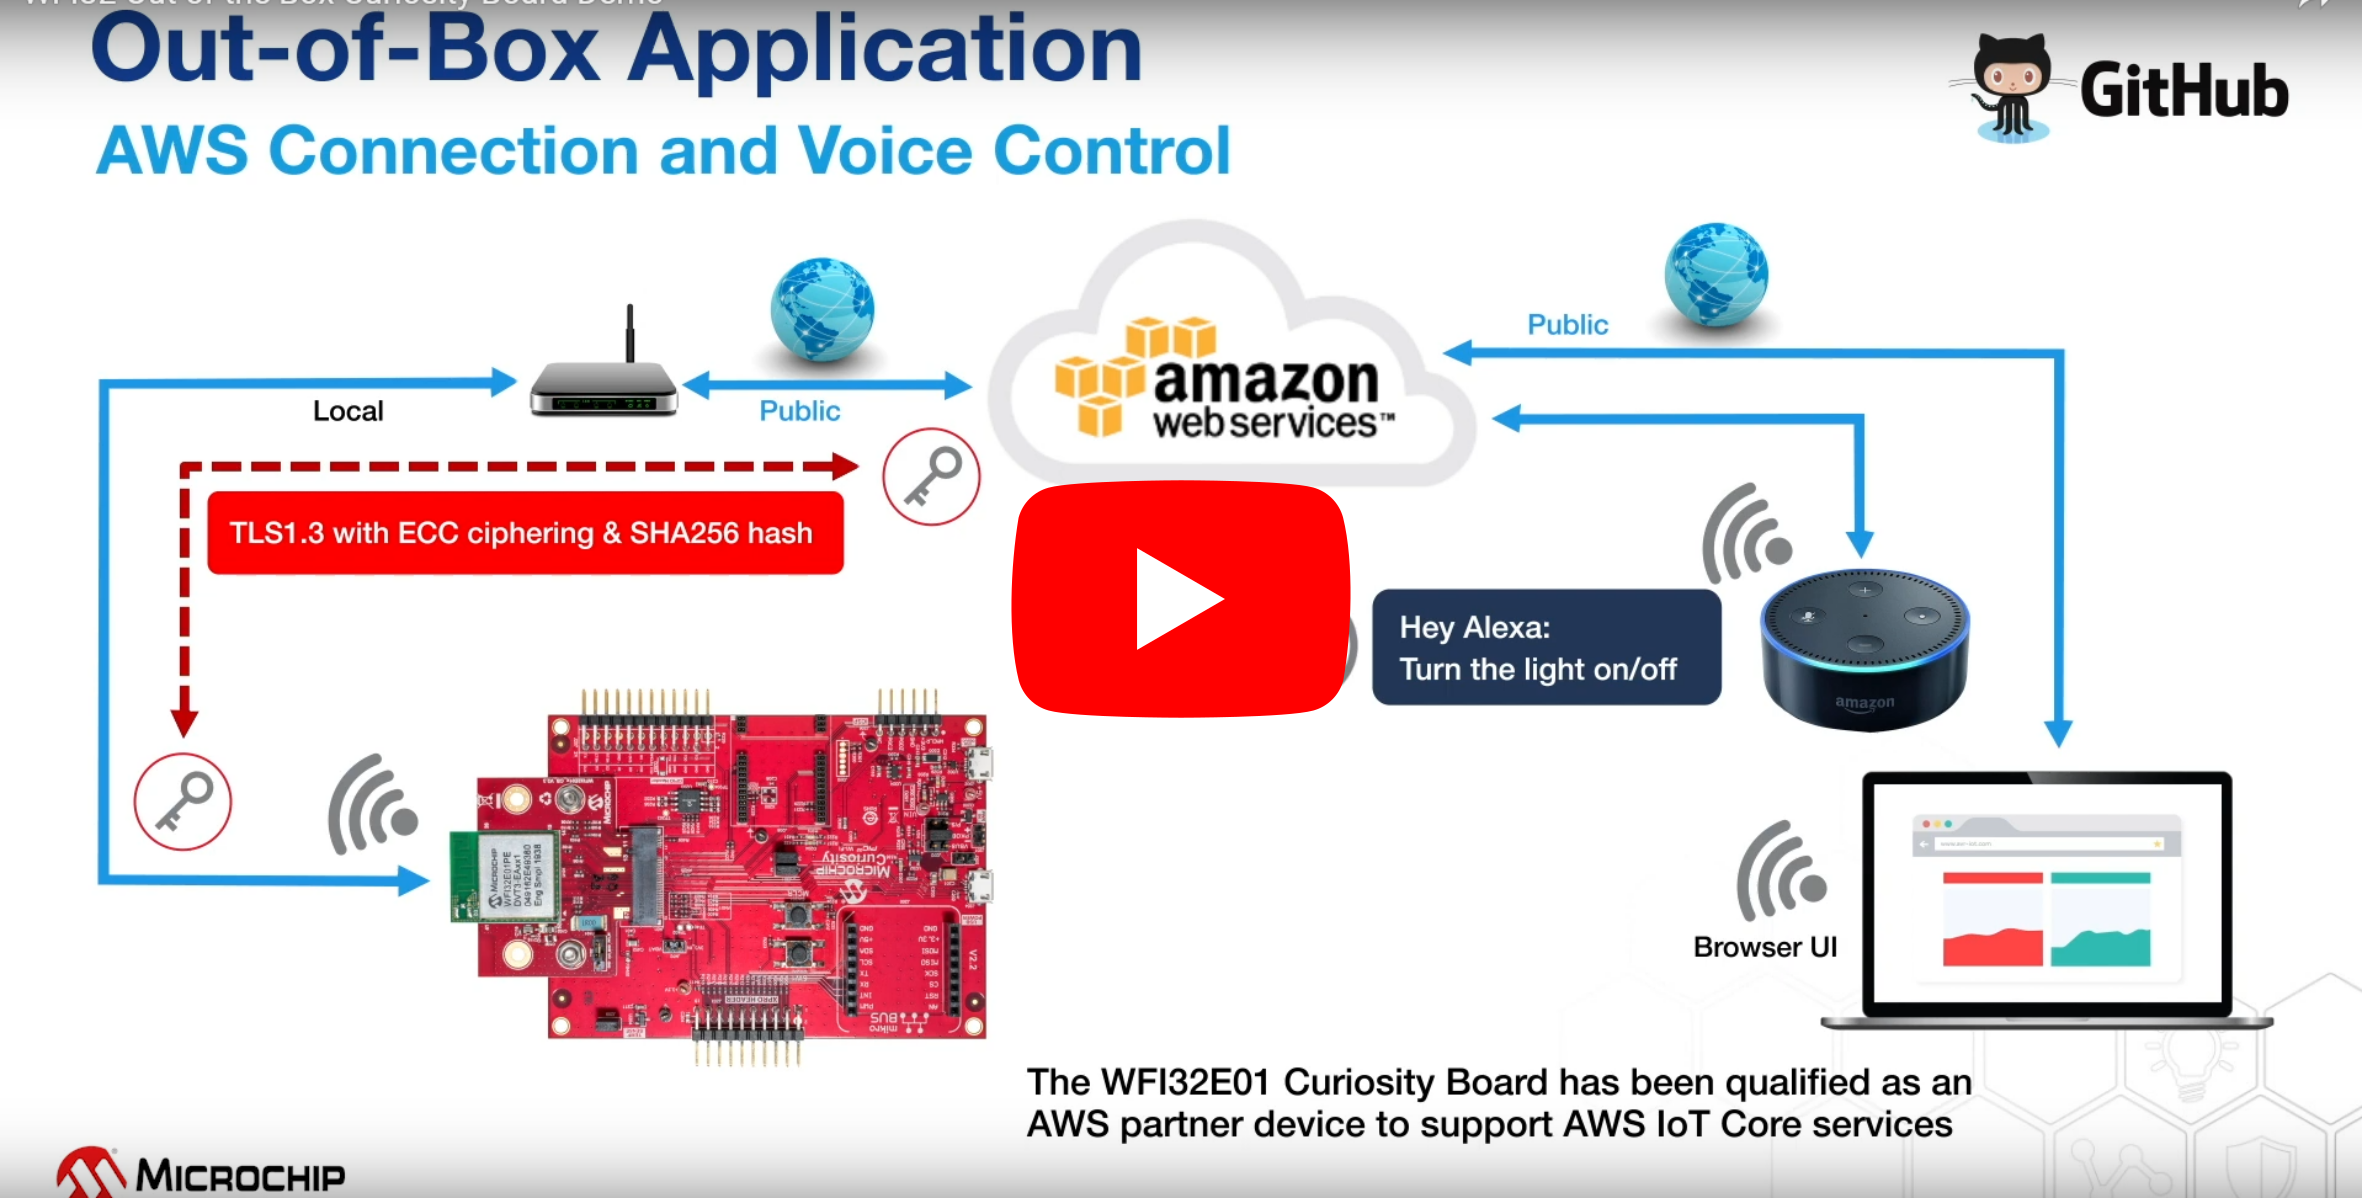 Unbox the new WFI32E01 Curiosity evaluation board to see how to connect to the cloud securely. Then interact with features on the board with Amazon Alexa.